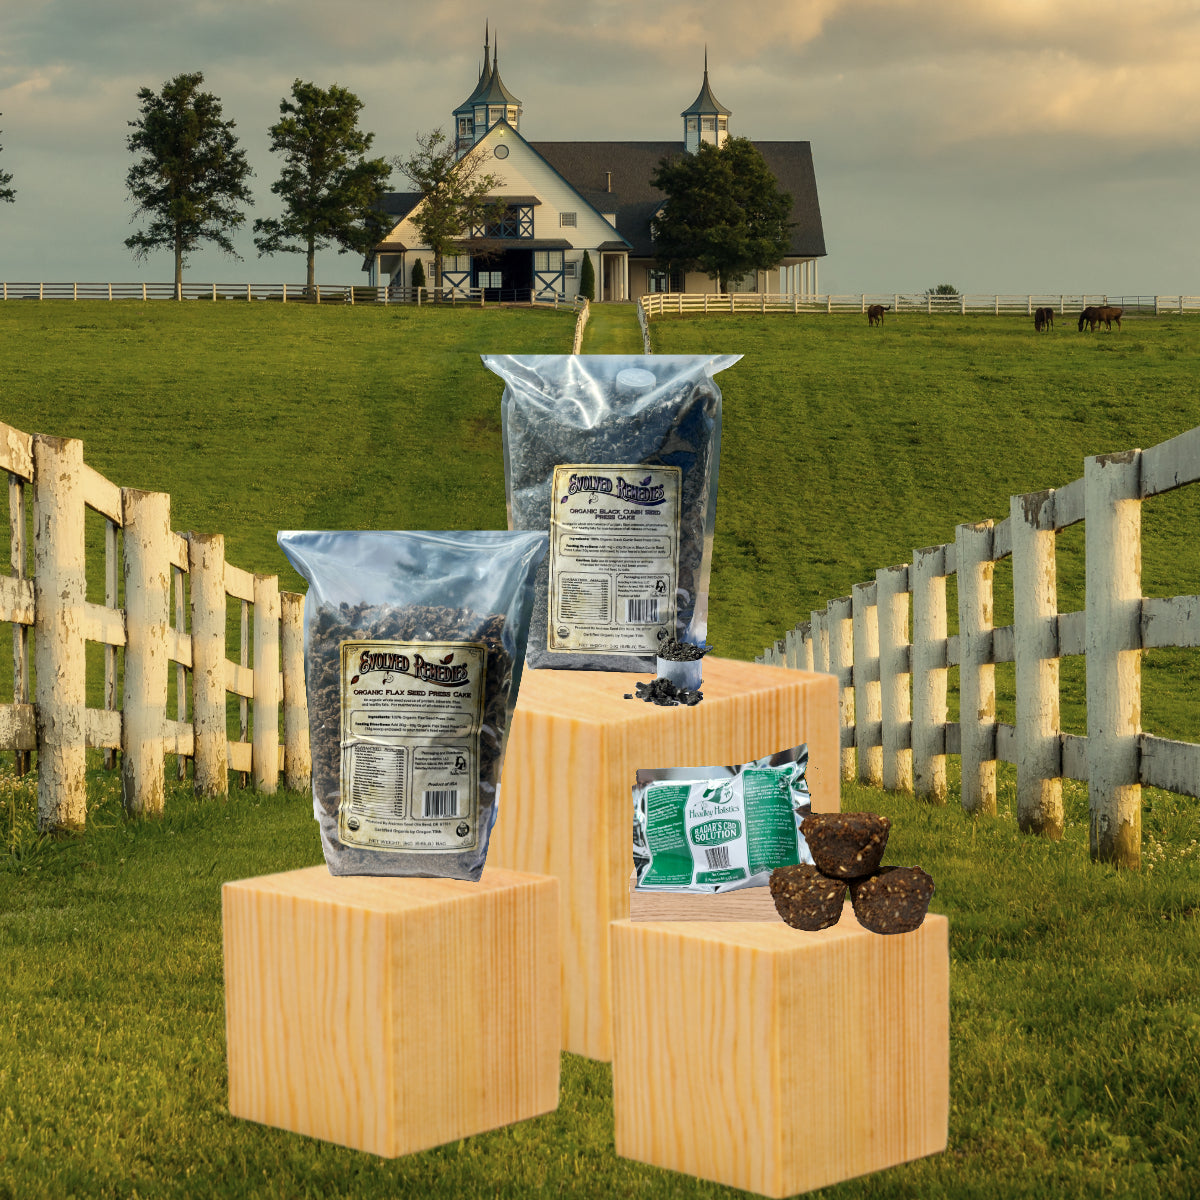 Evolved Remedies is Evolved Equine Nutrition - Set with a beautiful farm house backdrop, Evolved Remedies groundbreaking horse supplements are prominently featured, the best horse supplements. Superfood supplements for horses and elite calming nuggets 